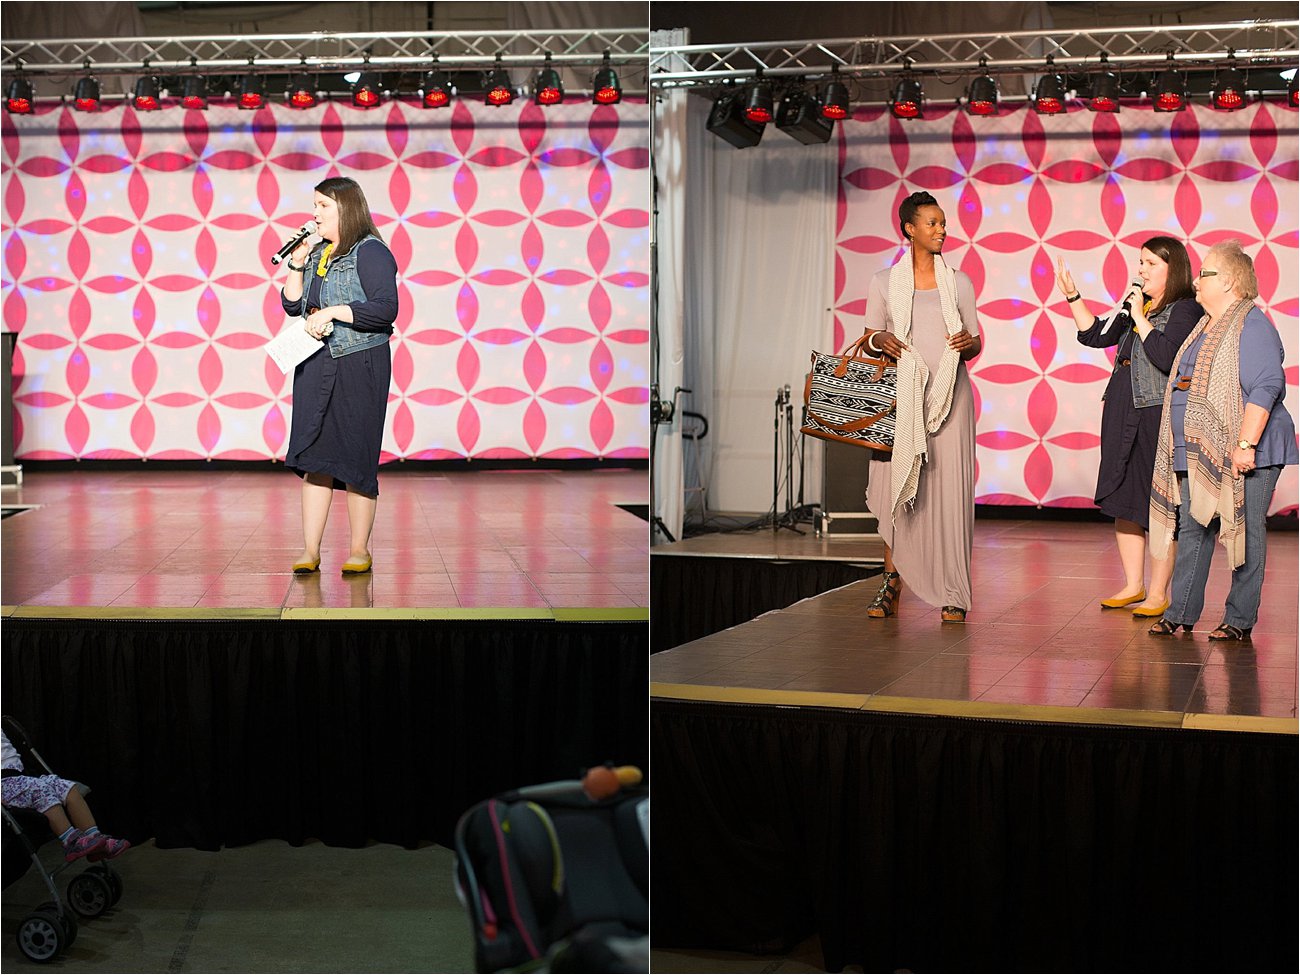 "Dressing with Purpose" Ethical Fashion Show at the Southern Women's Show in Raleigh, North Carolina 2016 | triFABB and Still Being Molly | North Carolina Fashion & Style Blogger (16)